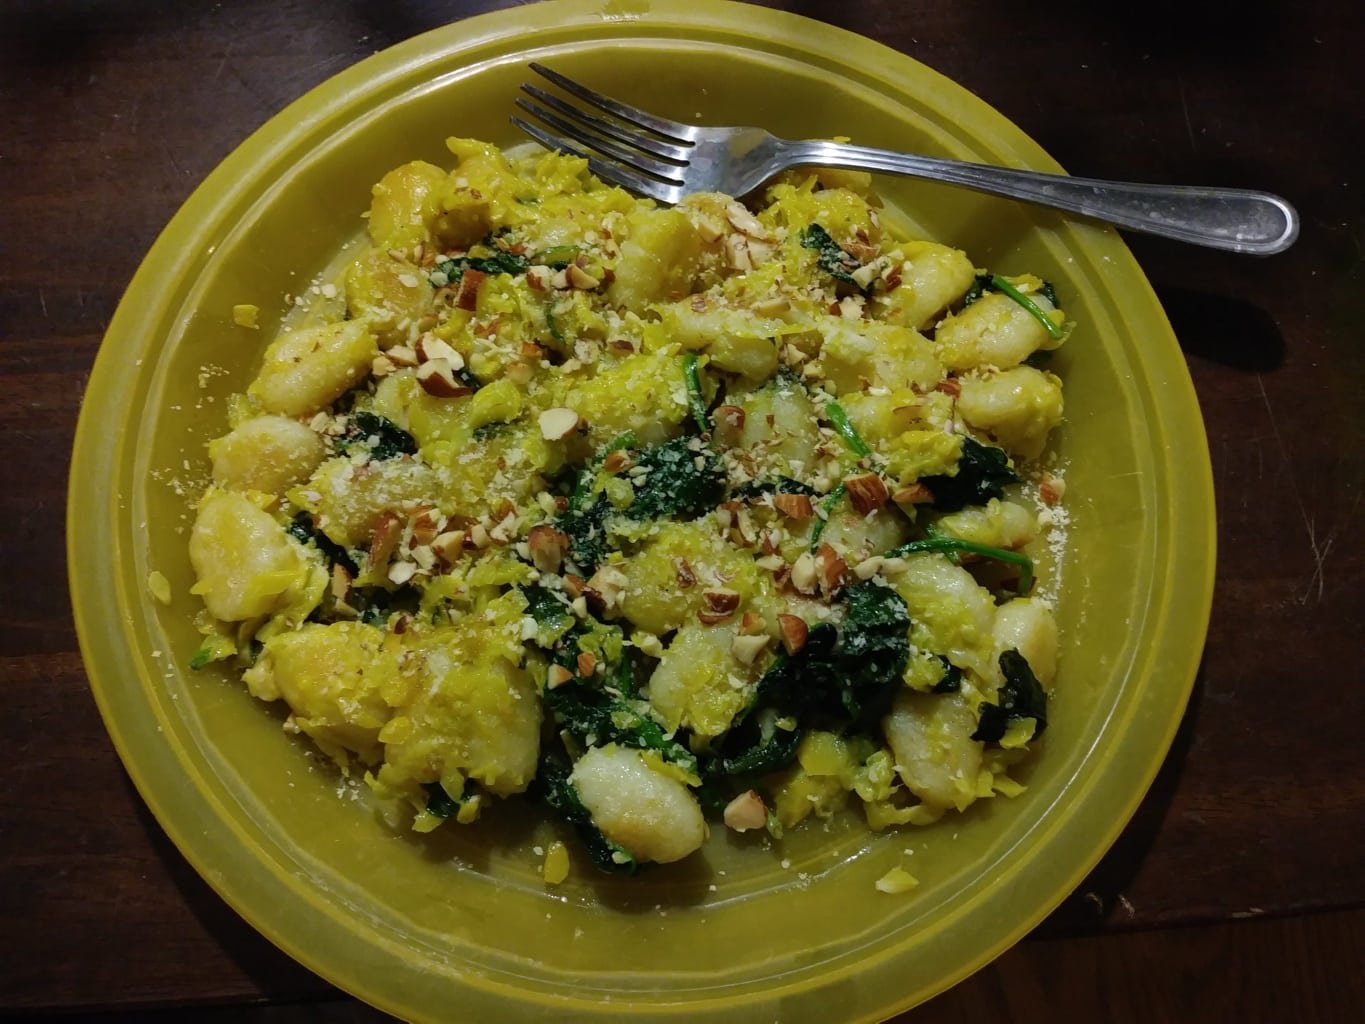 Pan Fried Gnocchi with Spinach and Yellow Squash